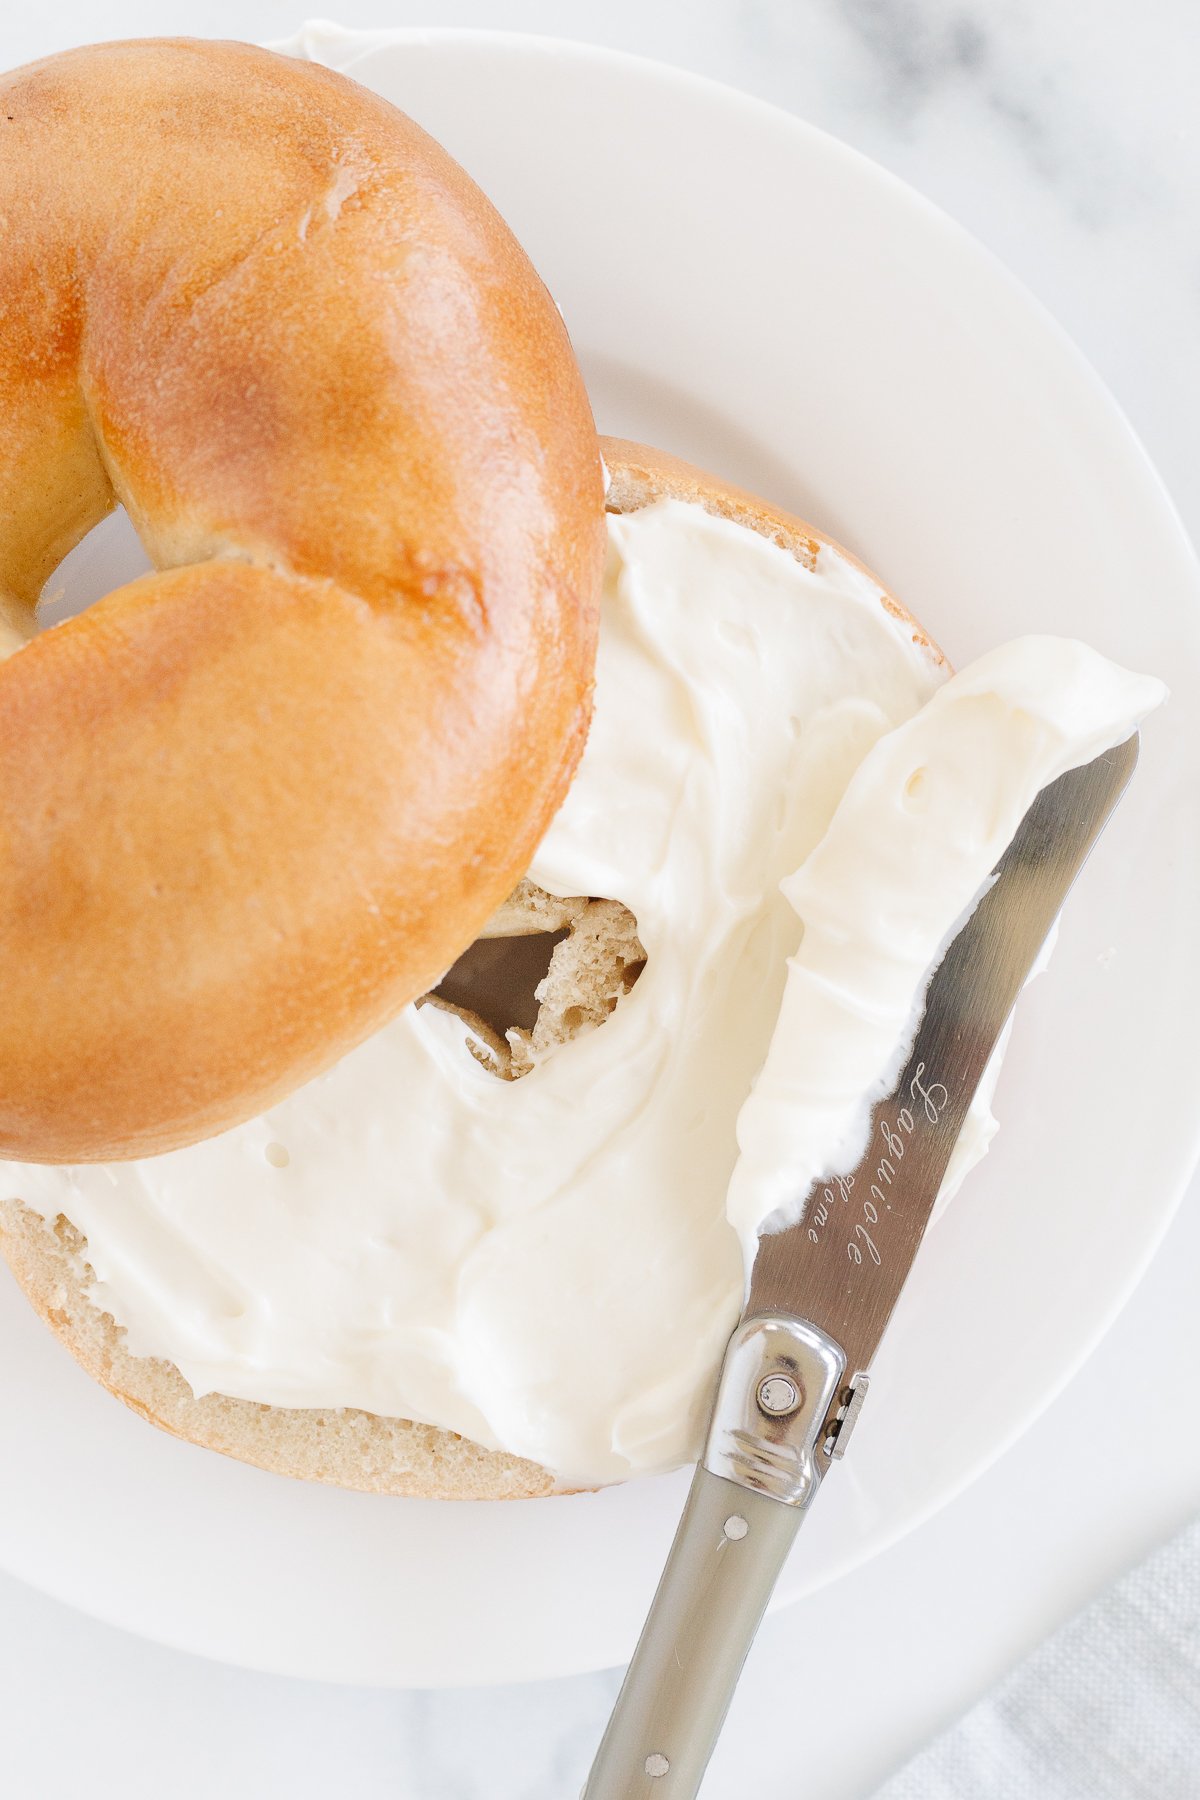 A bagel with whipped cream cheese spread.